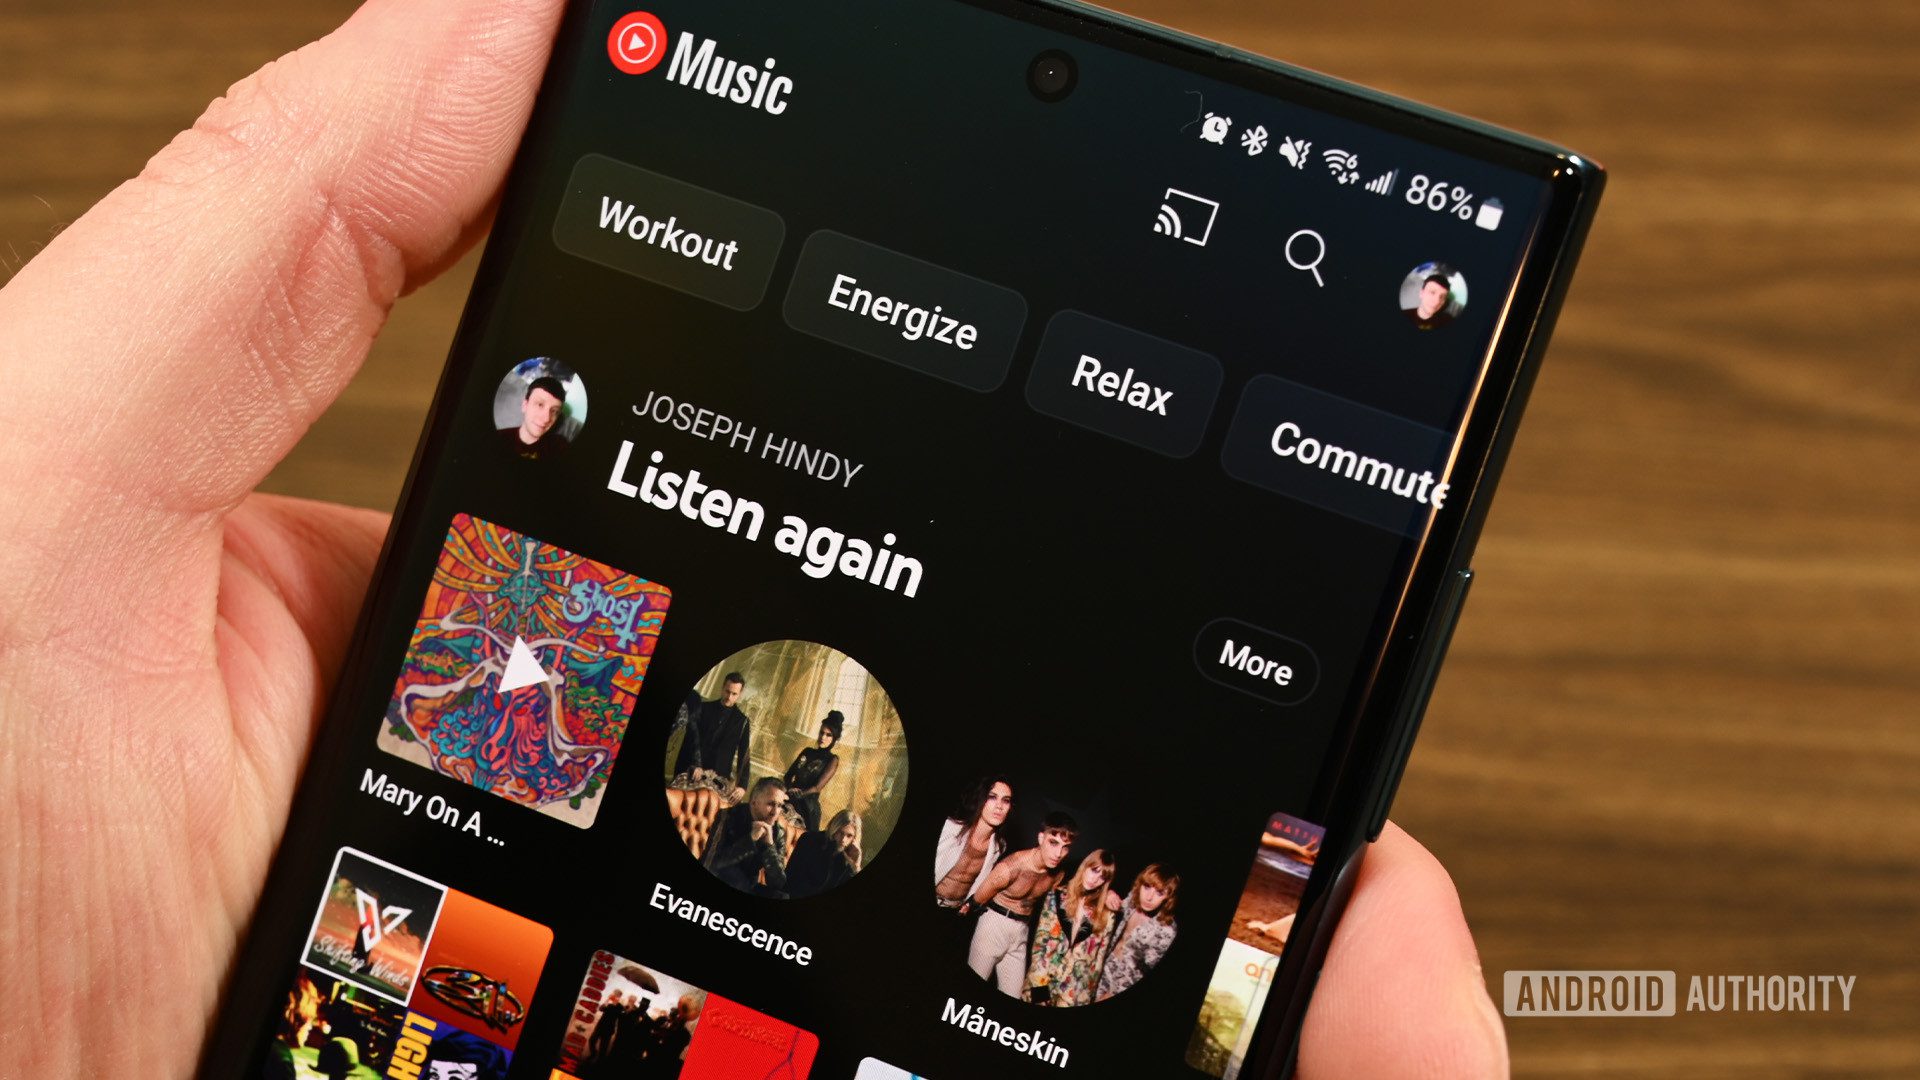 YouTube Music will now let you upload music to its desktop website